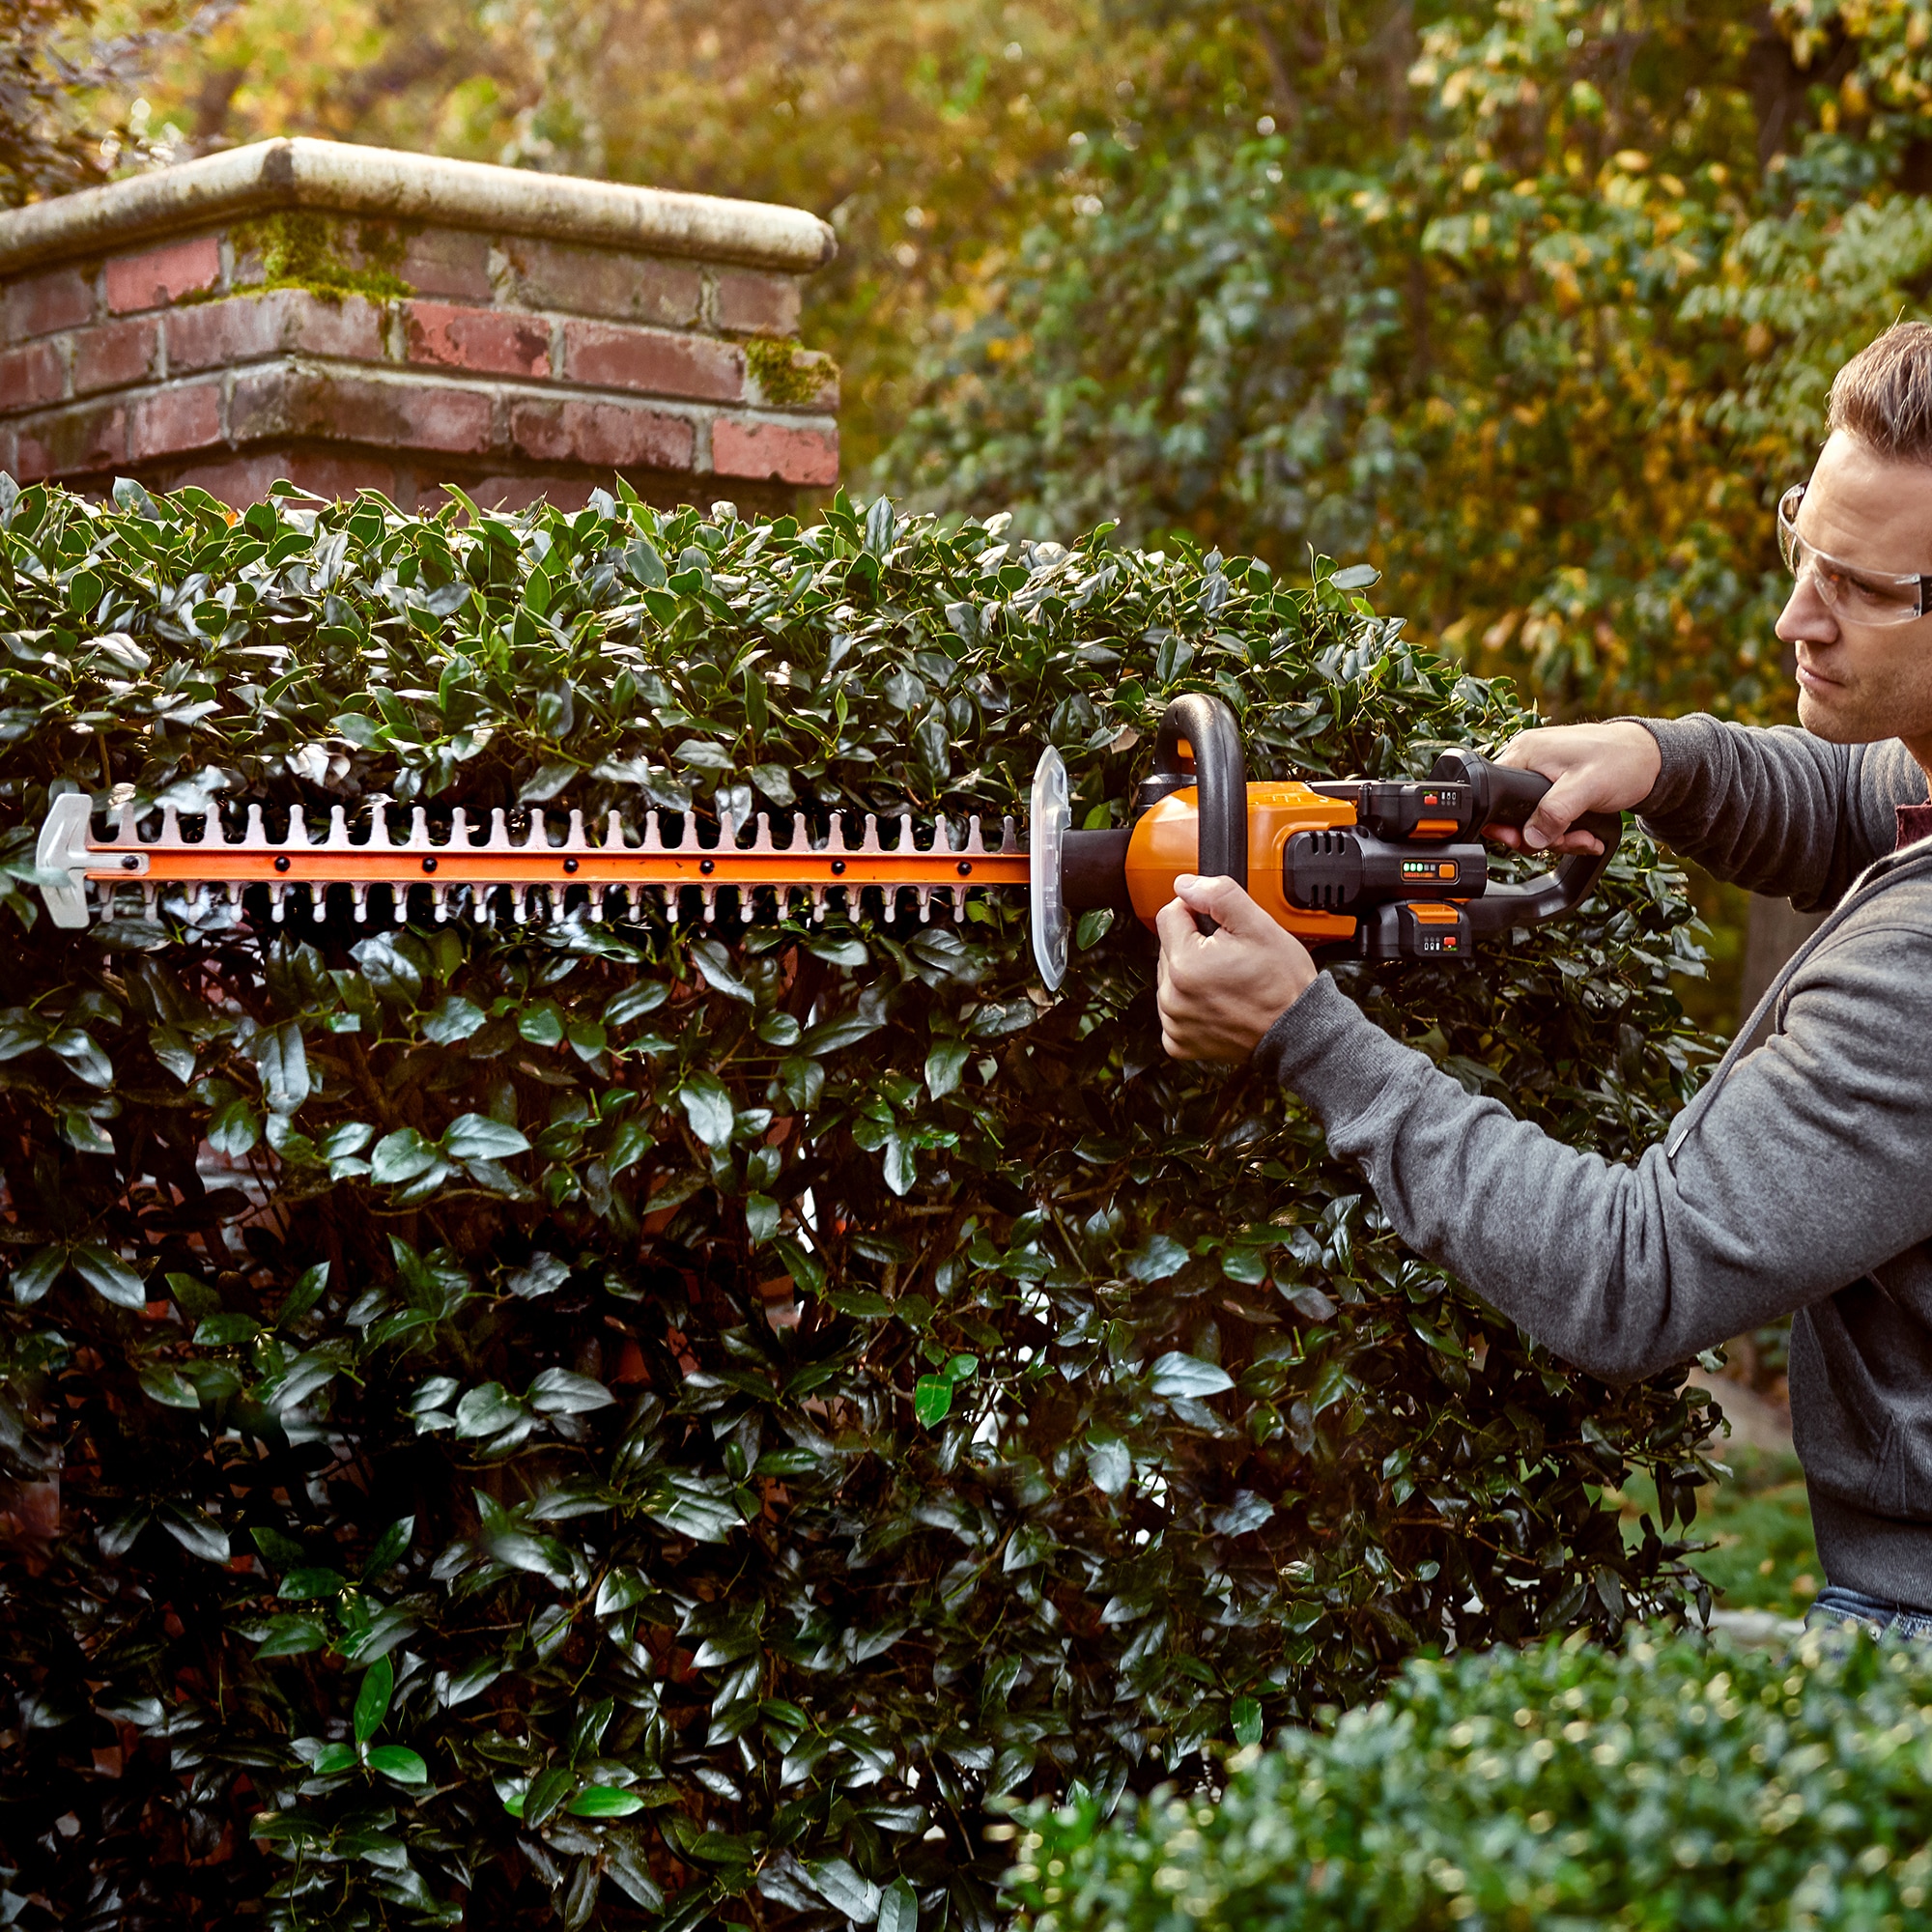 24 Cordless Hedge Trimmer, 40V Tool Only (WG284.9)